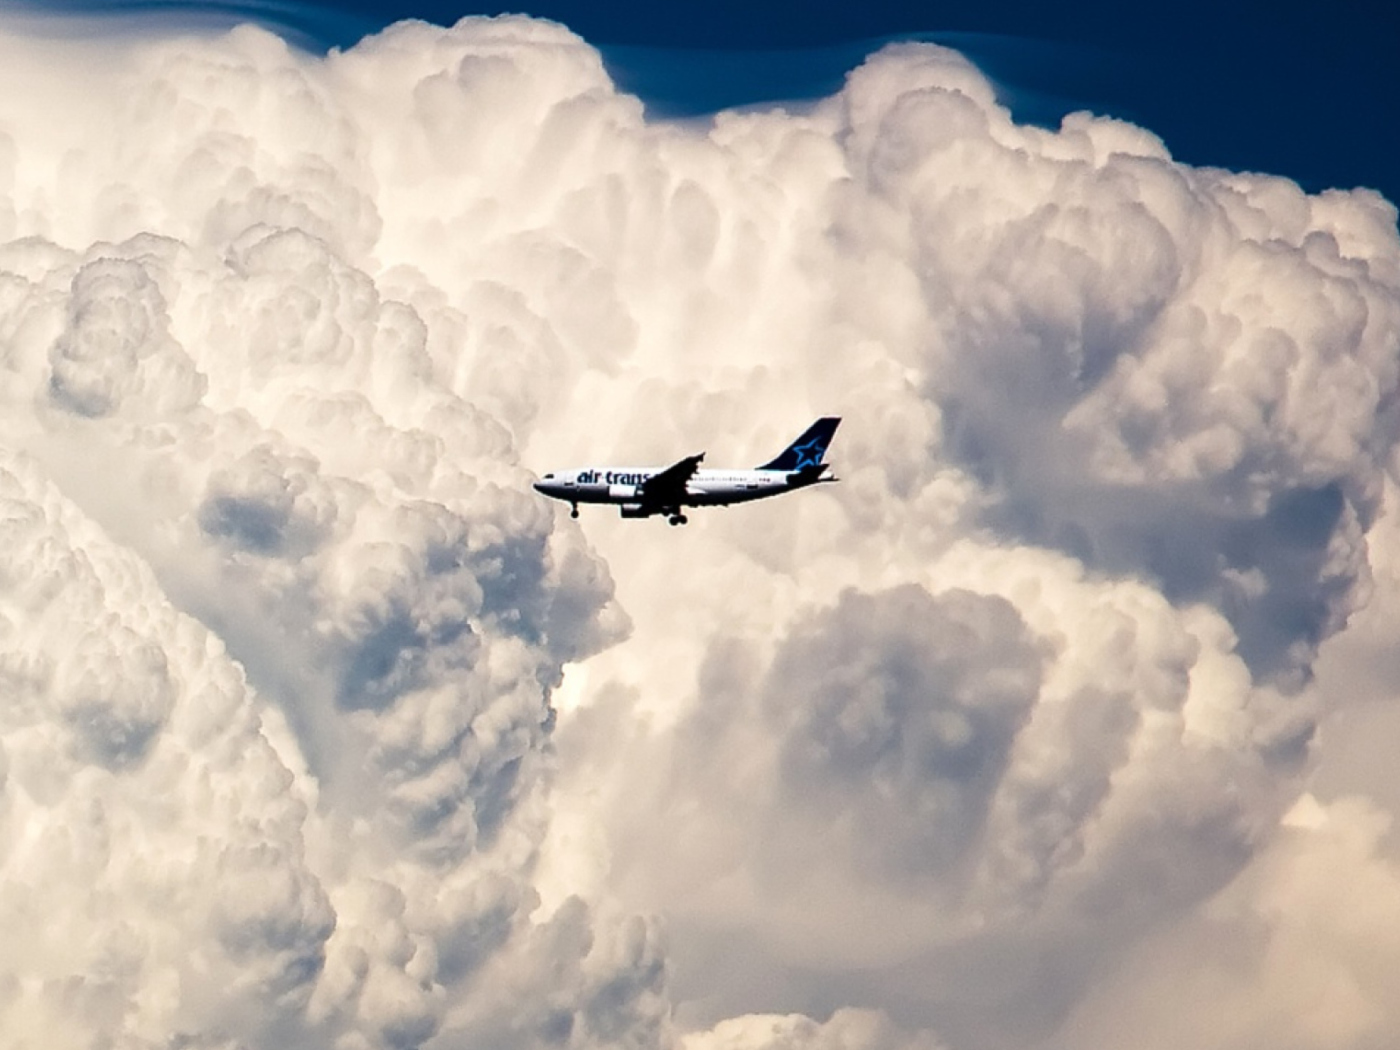 Plane In The Clouds wallpaper 1400x1050